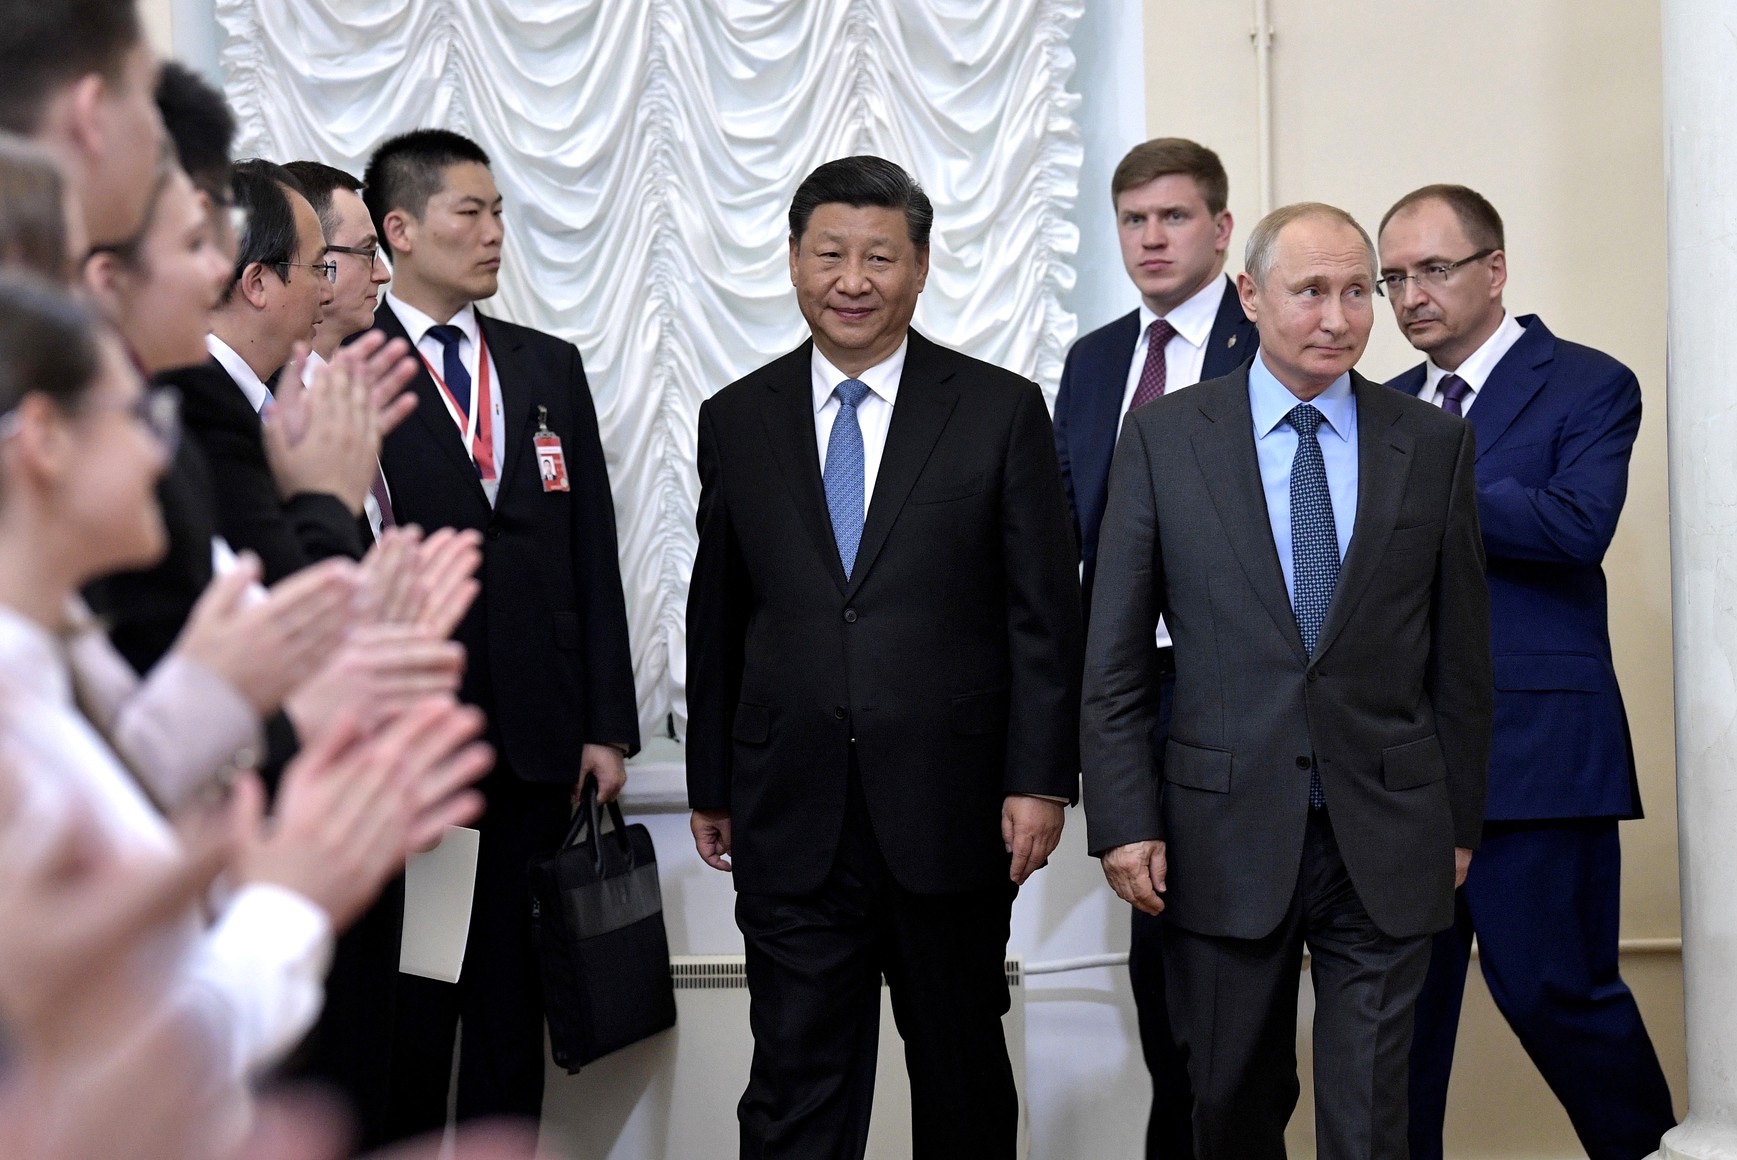 Chinese leader Xi Jinping and Russian leader Vladimir Putin at the Saint Petersburg State University during Xi's visit to Russia in June 2019.